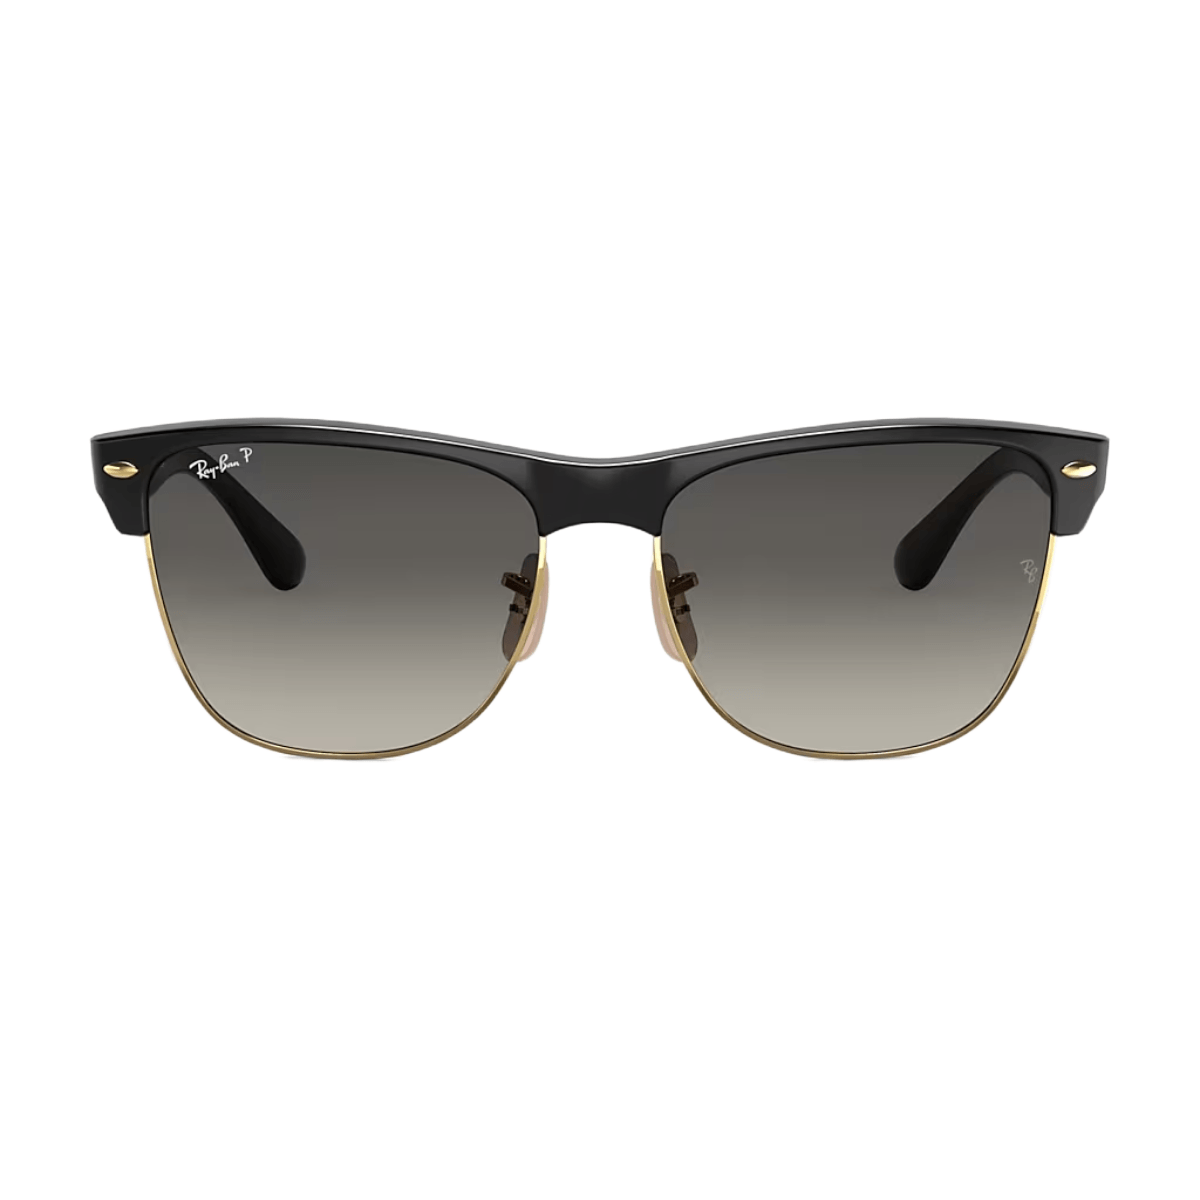 Ray-Ban Clubmaster Oversized – sunglasses – shop at Booztlet